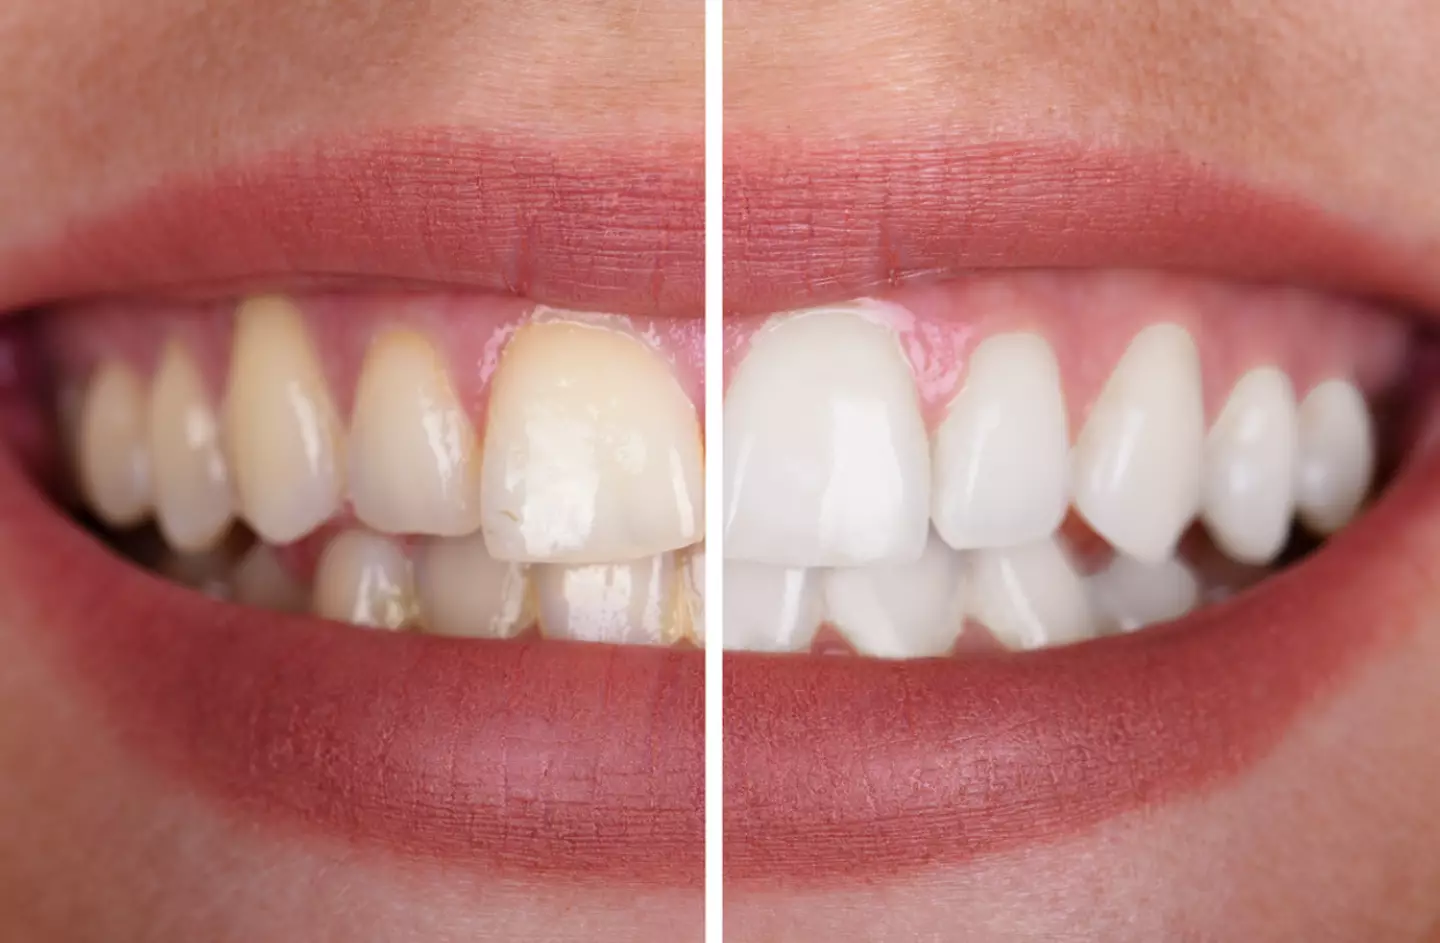 Yellow vs white teeth. (Getty Stock Images)